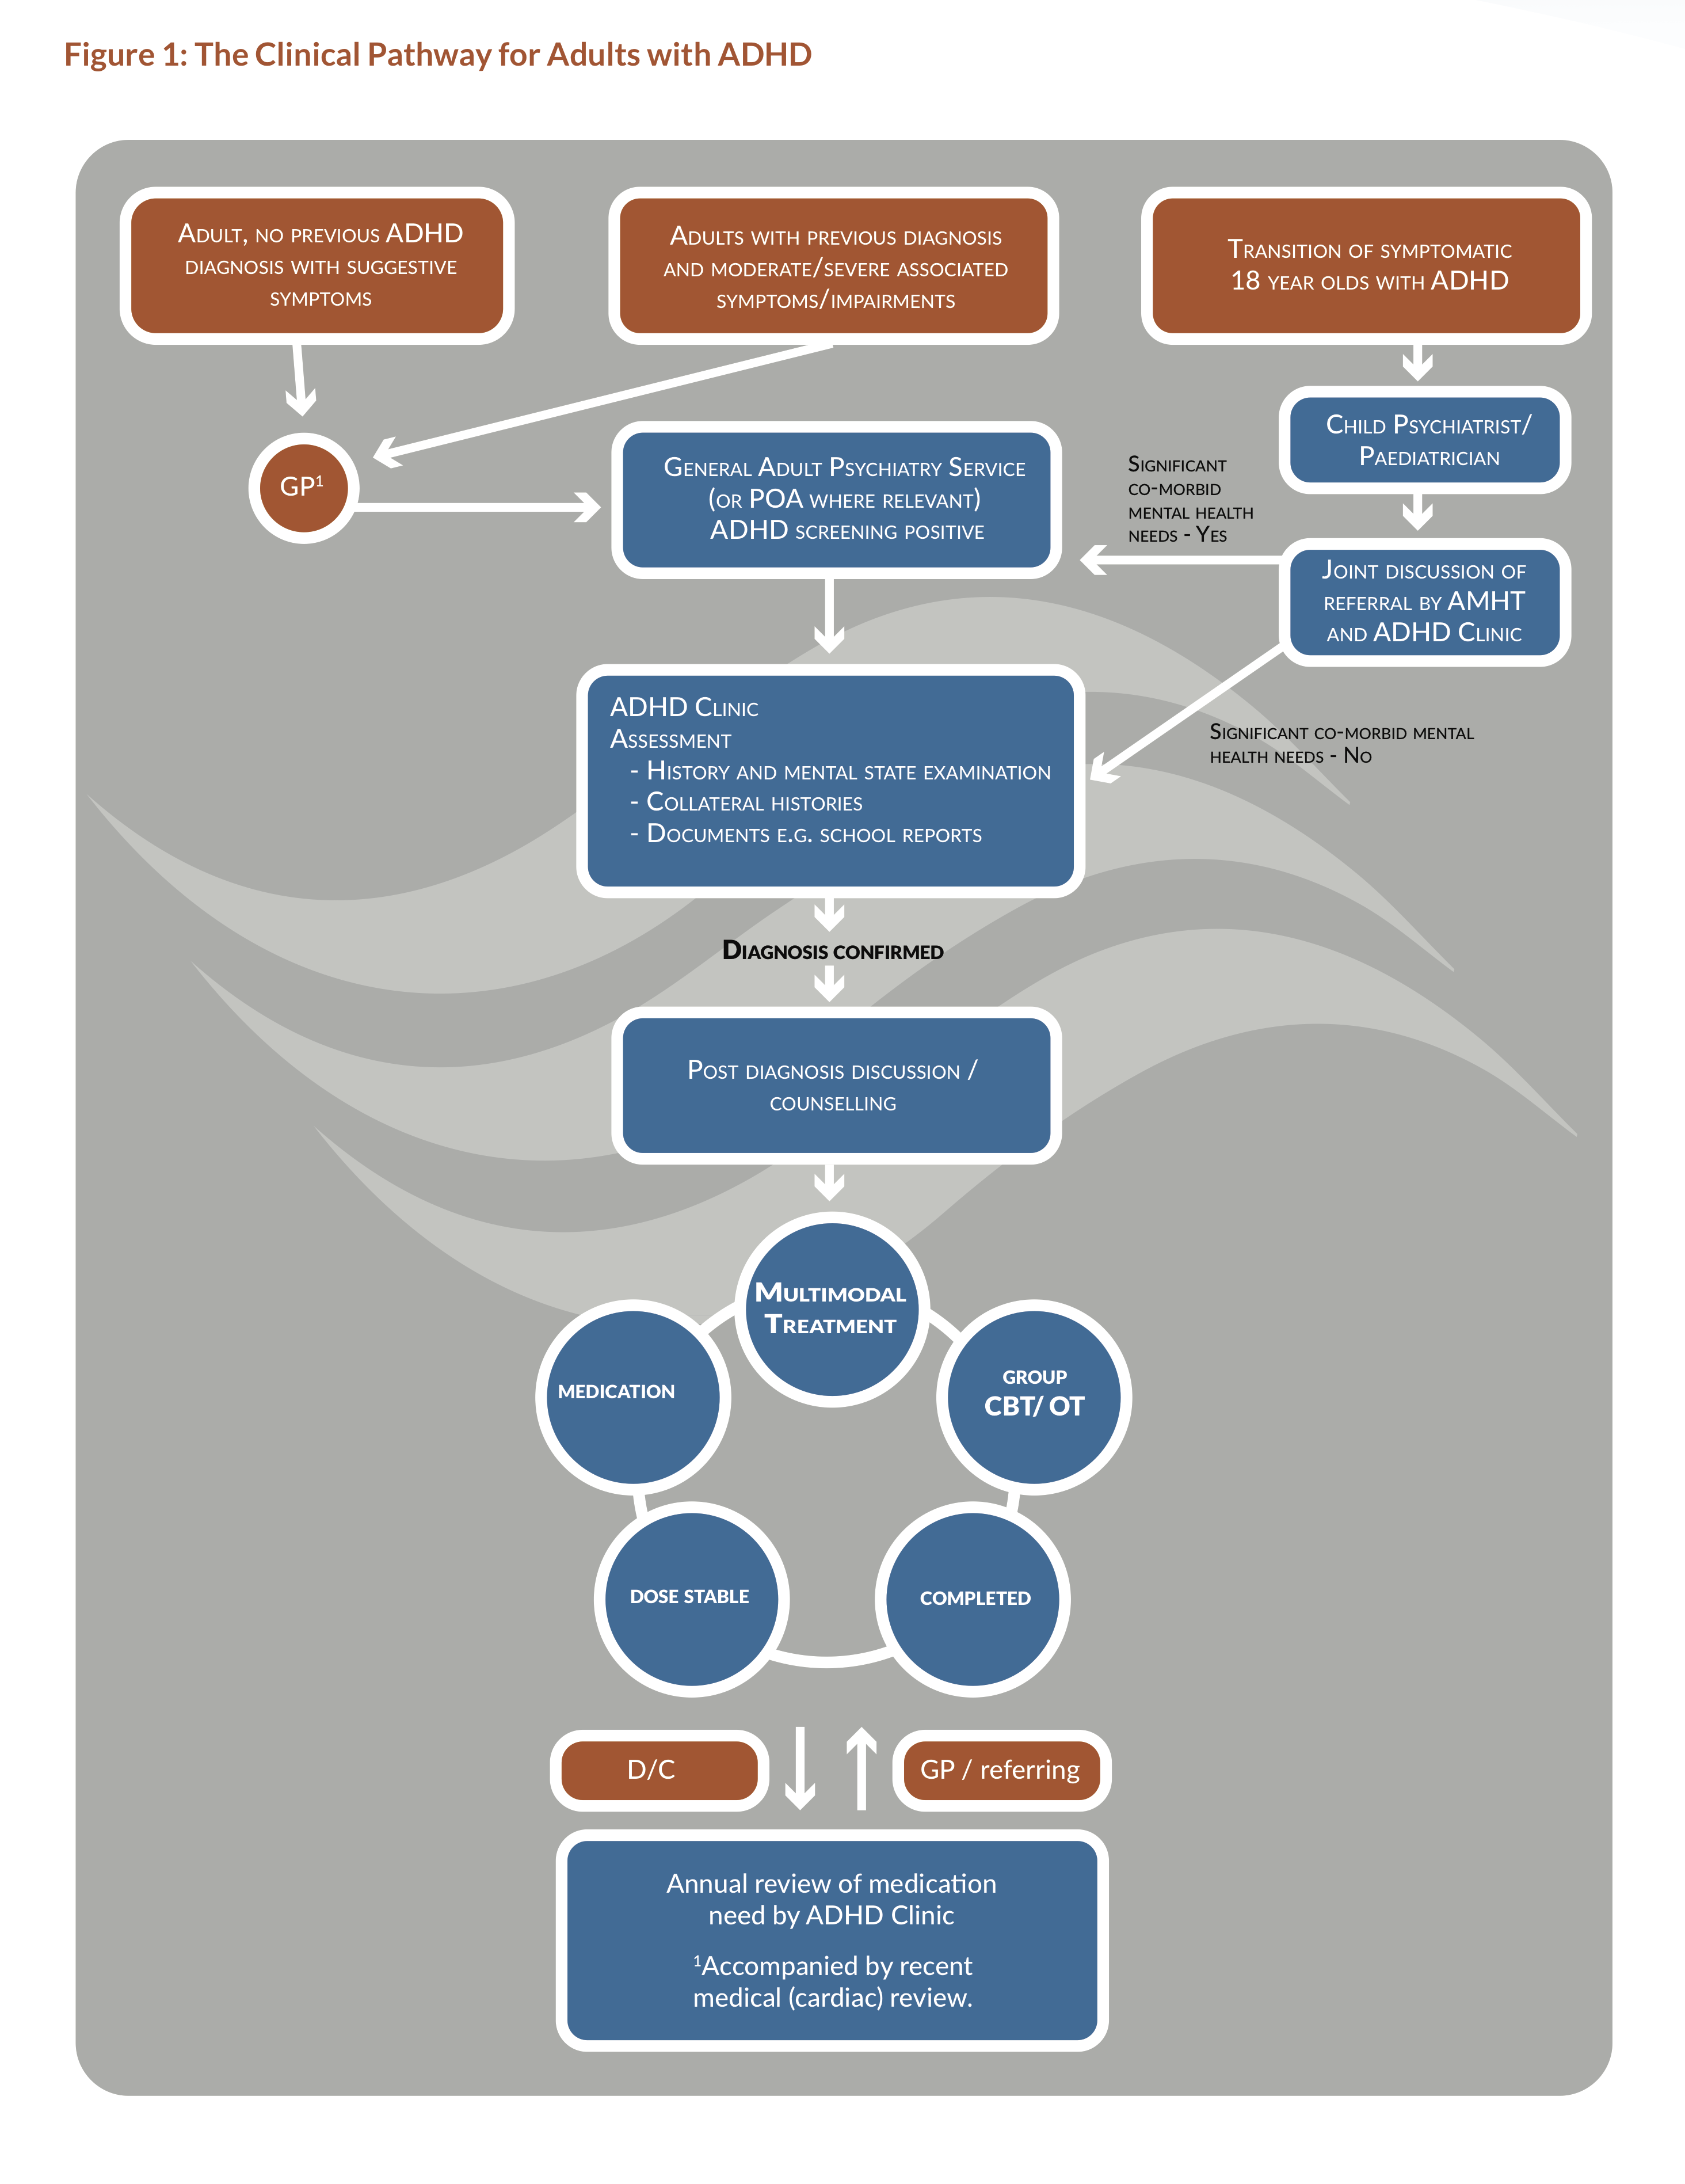 A diagram of the HSE's clinical pathway for adults with ADHD